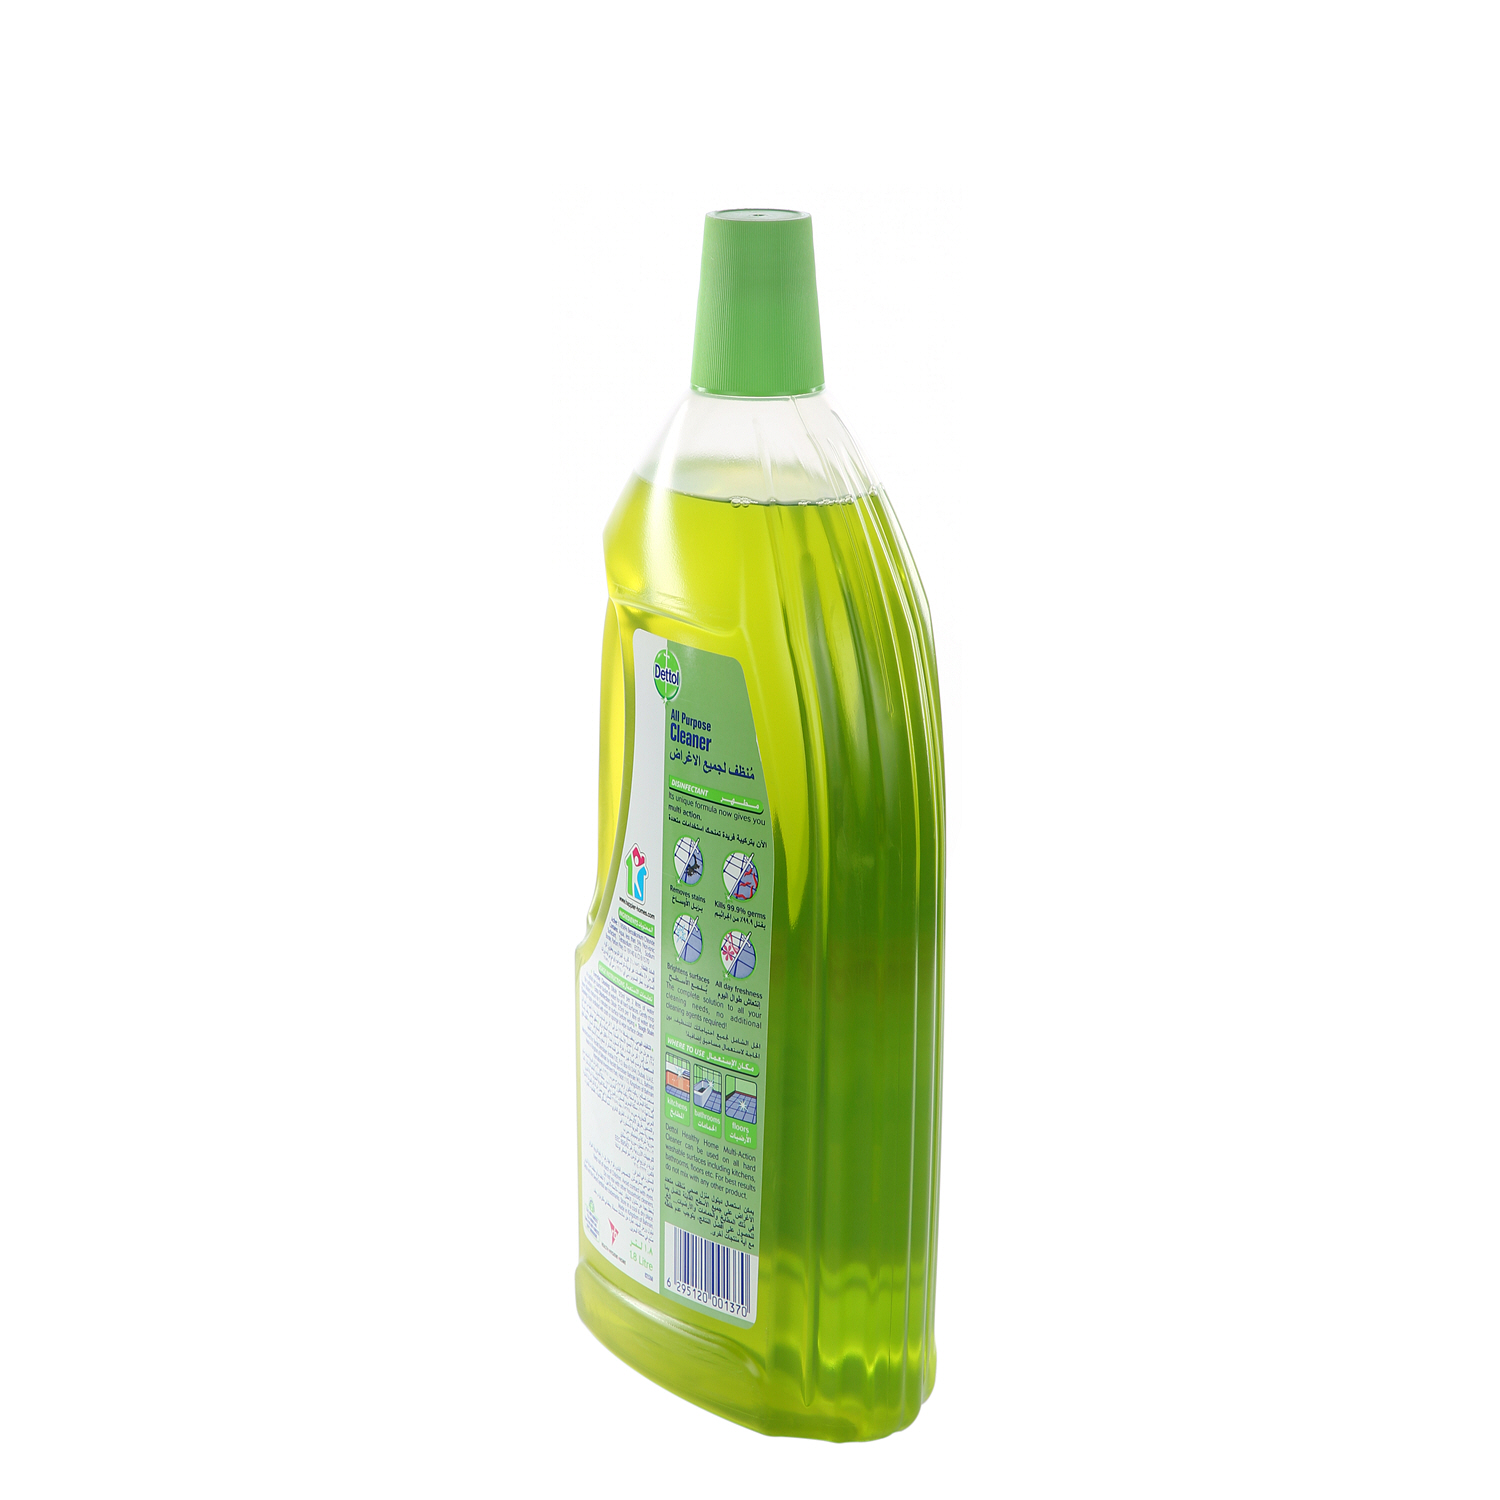 Dettol Multi Action Cleaner 4 In 1 Pine 1.8 L